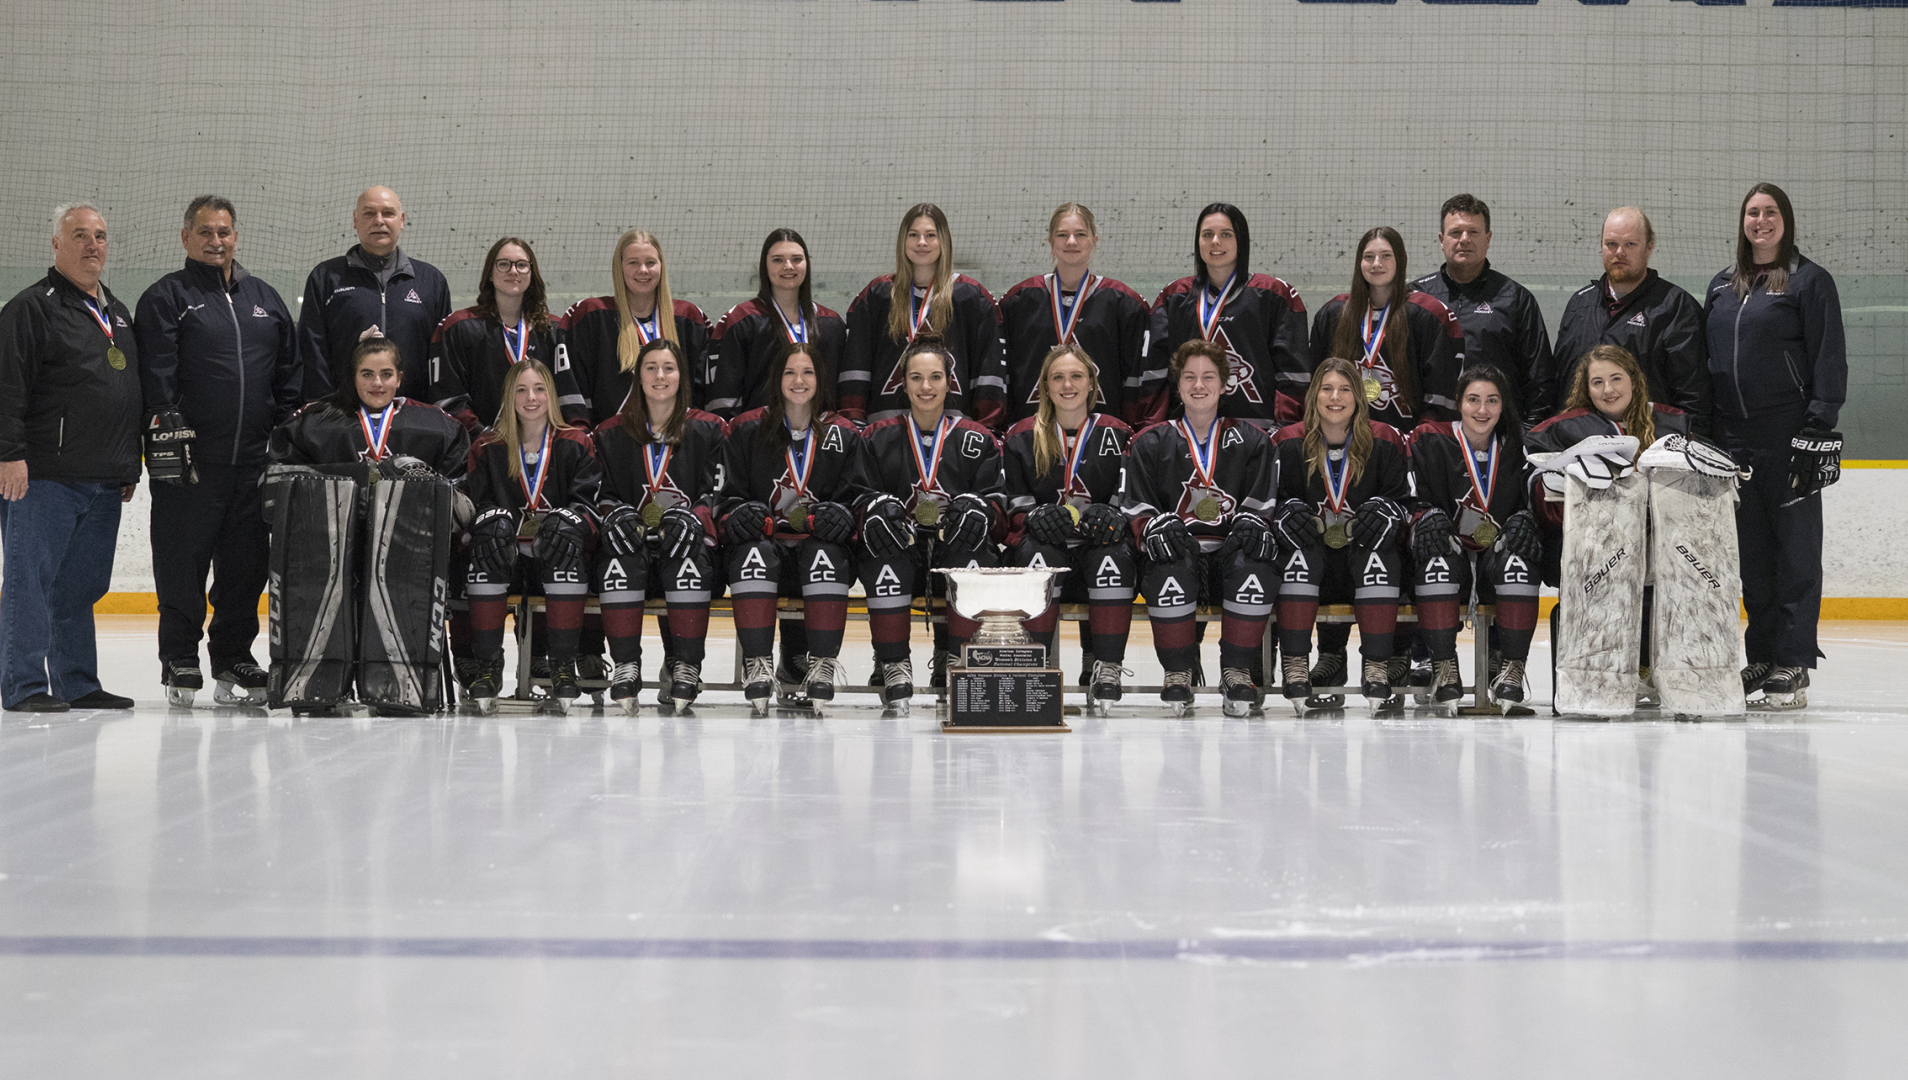 The 2021/22 Cougars Women's Hockey team and coaching staff pose for a team photo with their ACHA National Championship trophy.